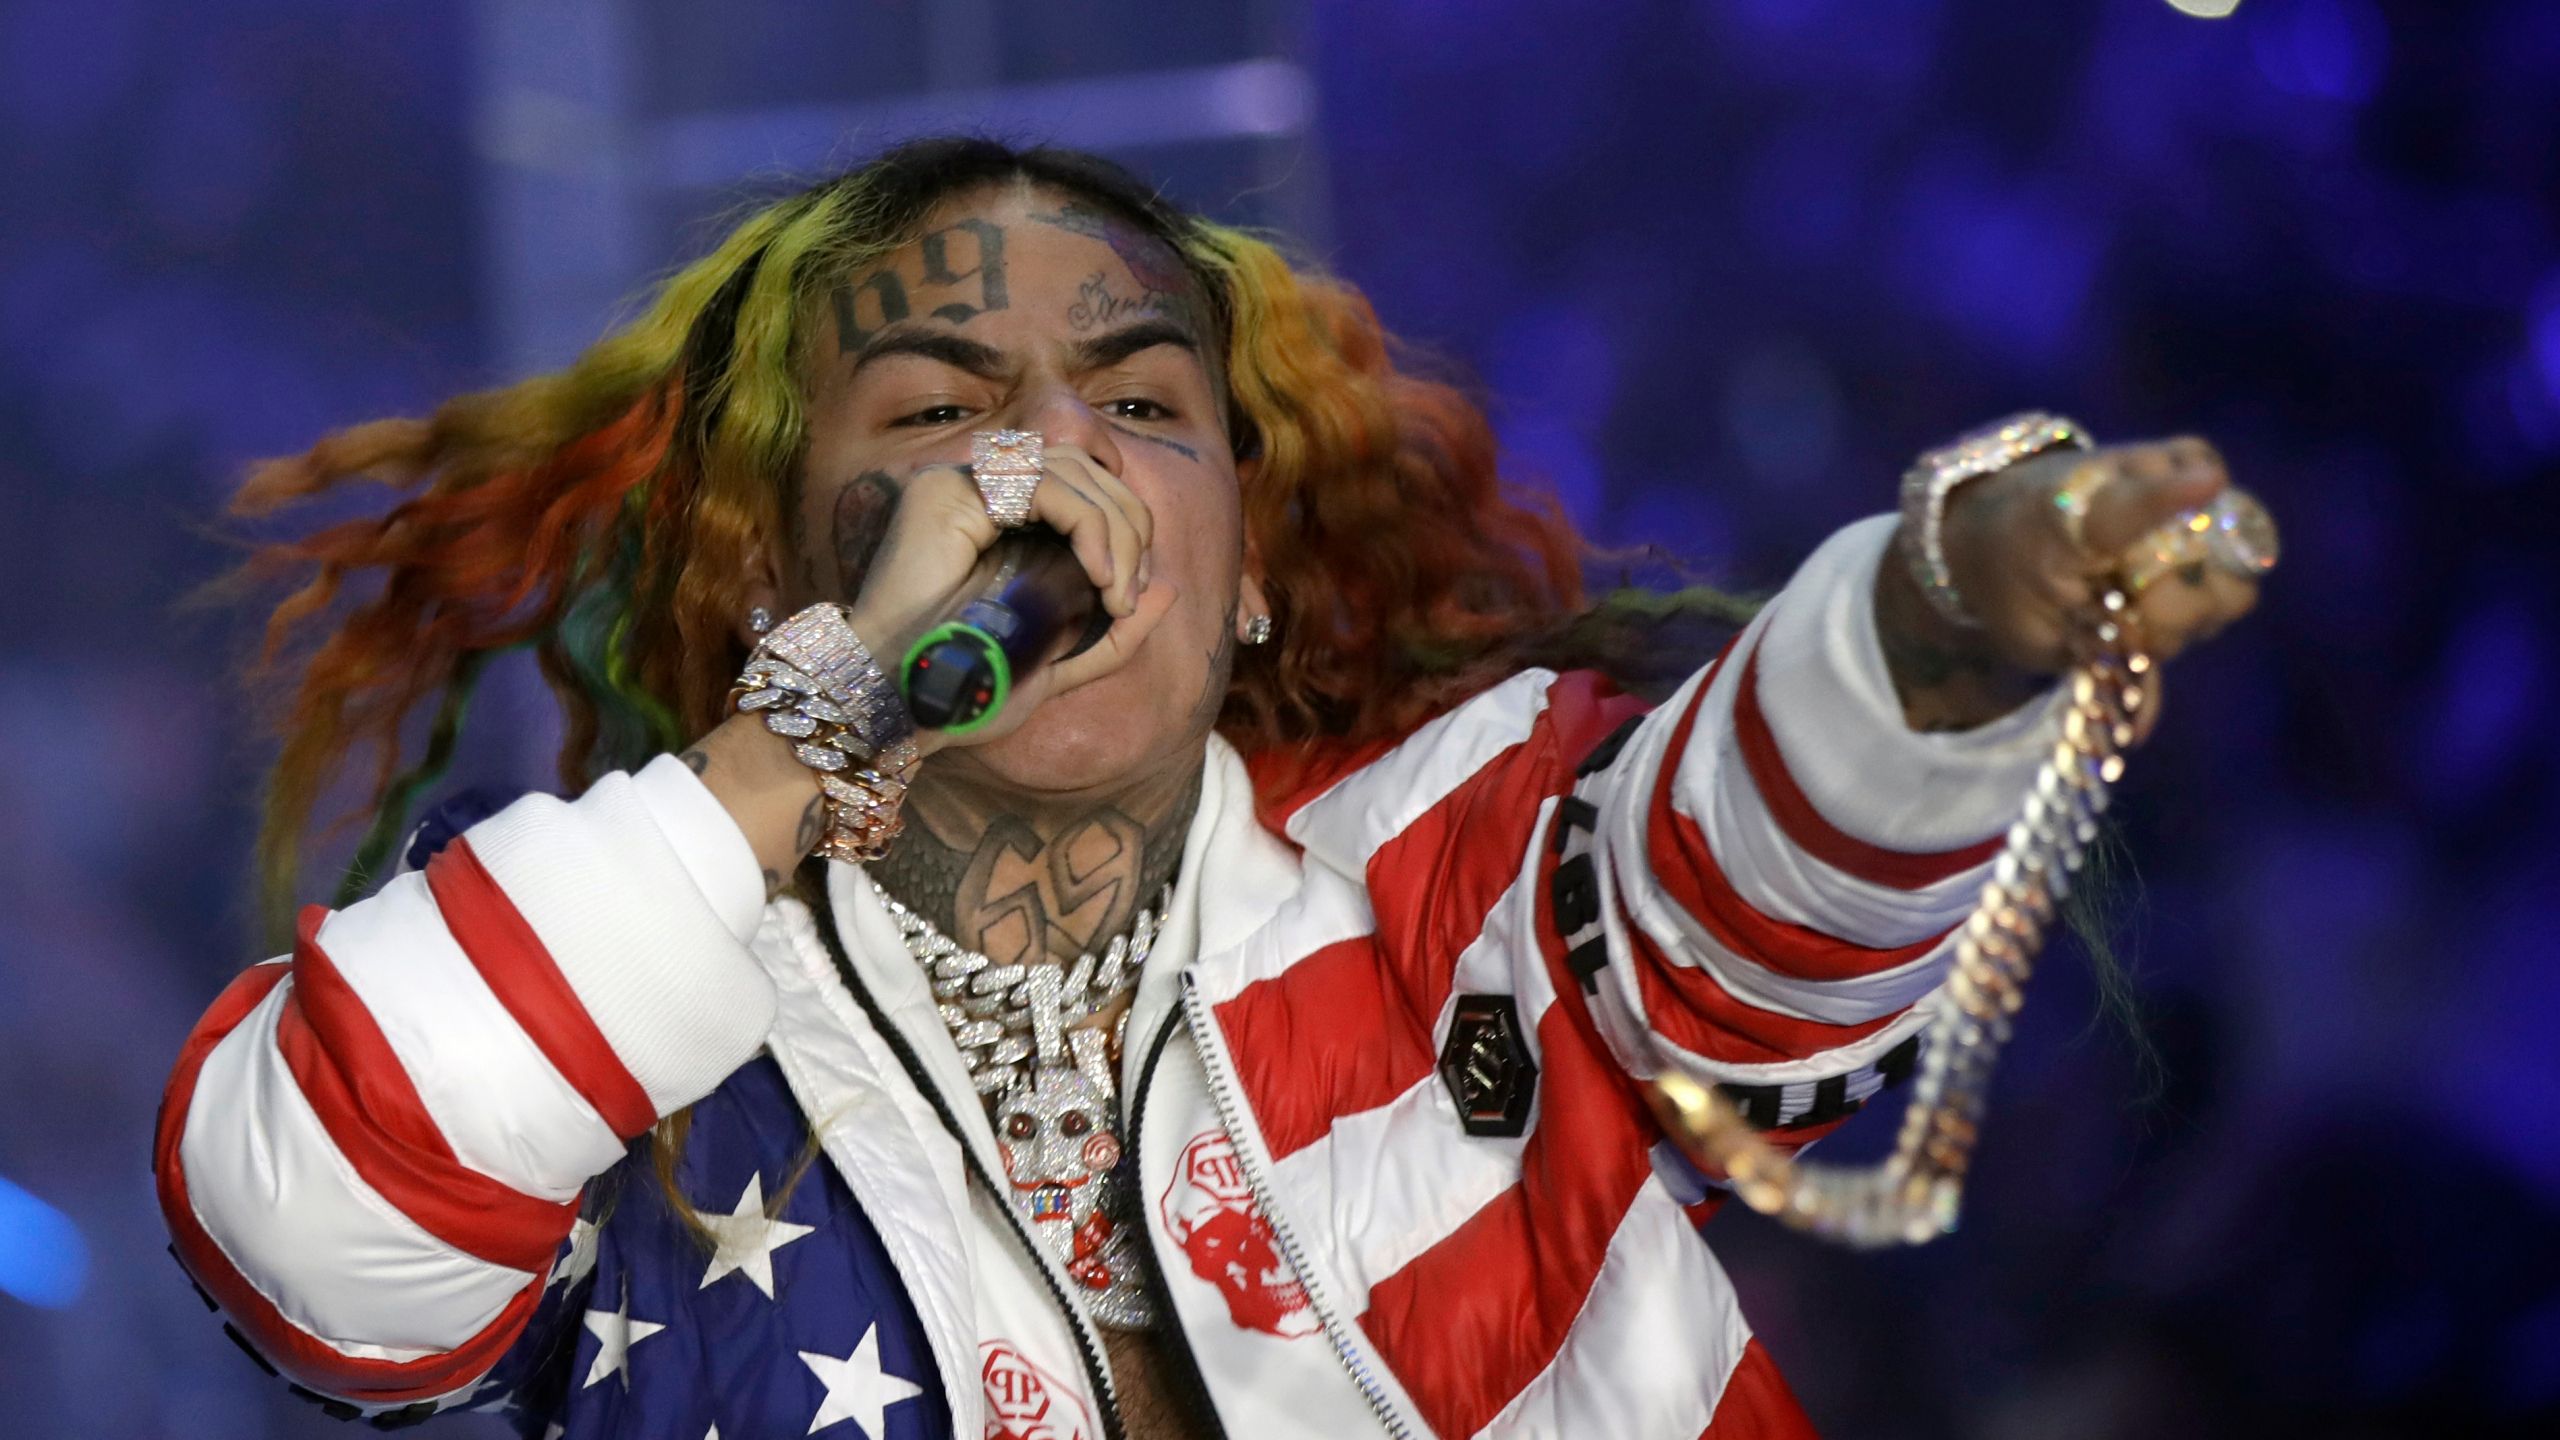 Tekashi 6ix9ine releases new video from home confinementNews